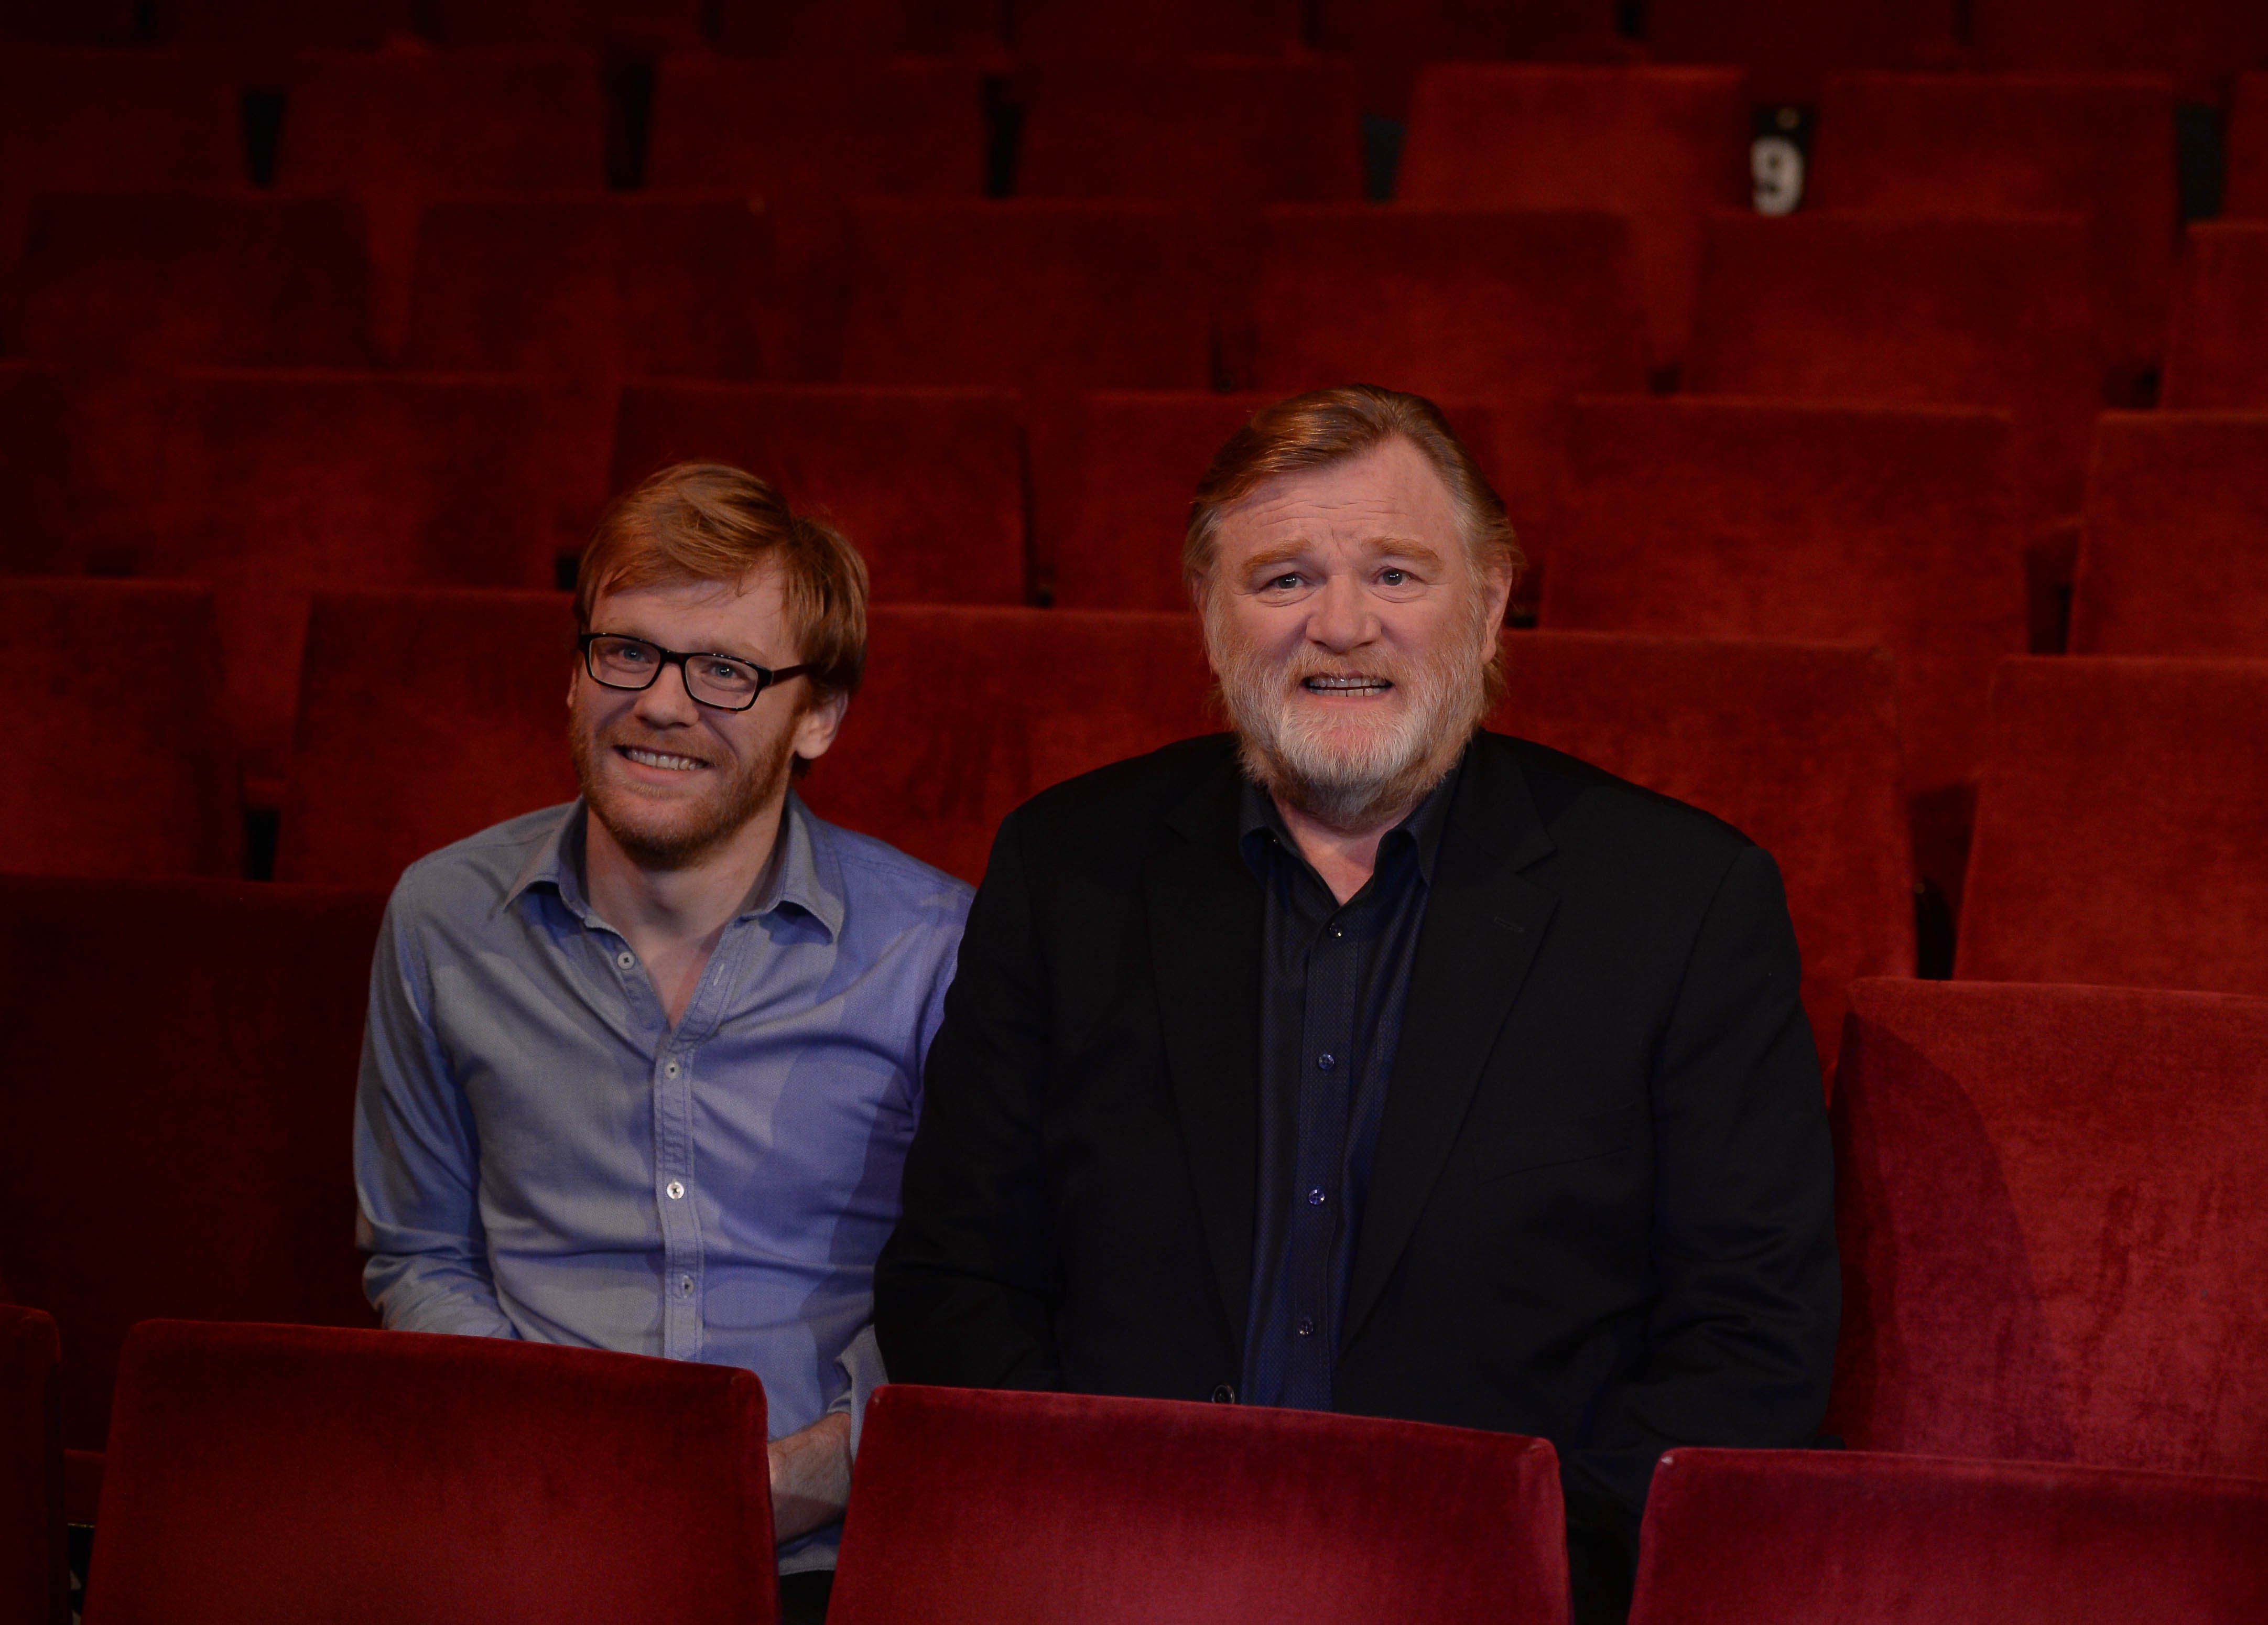 Brian Gleeson and Brendan Gleeson at the Olympia Theatre on September 24, 2014, in Ireland | Source: Getty Images